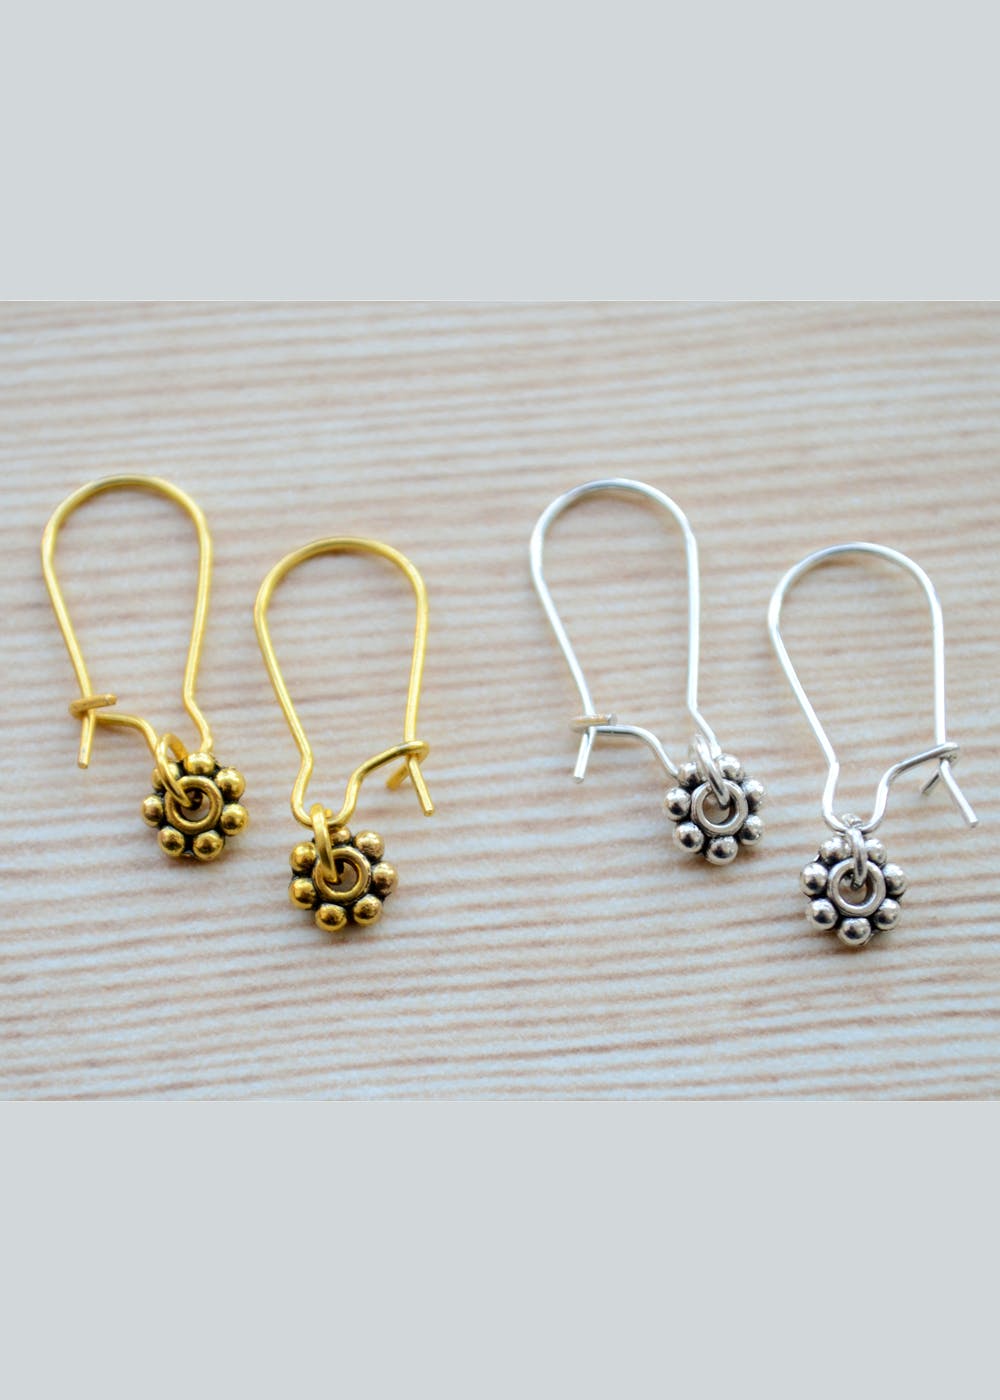 11 Reasons Why You Should Gift Earrings to a Loved One